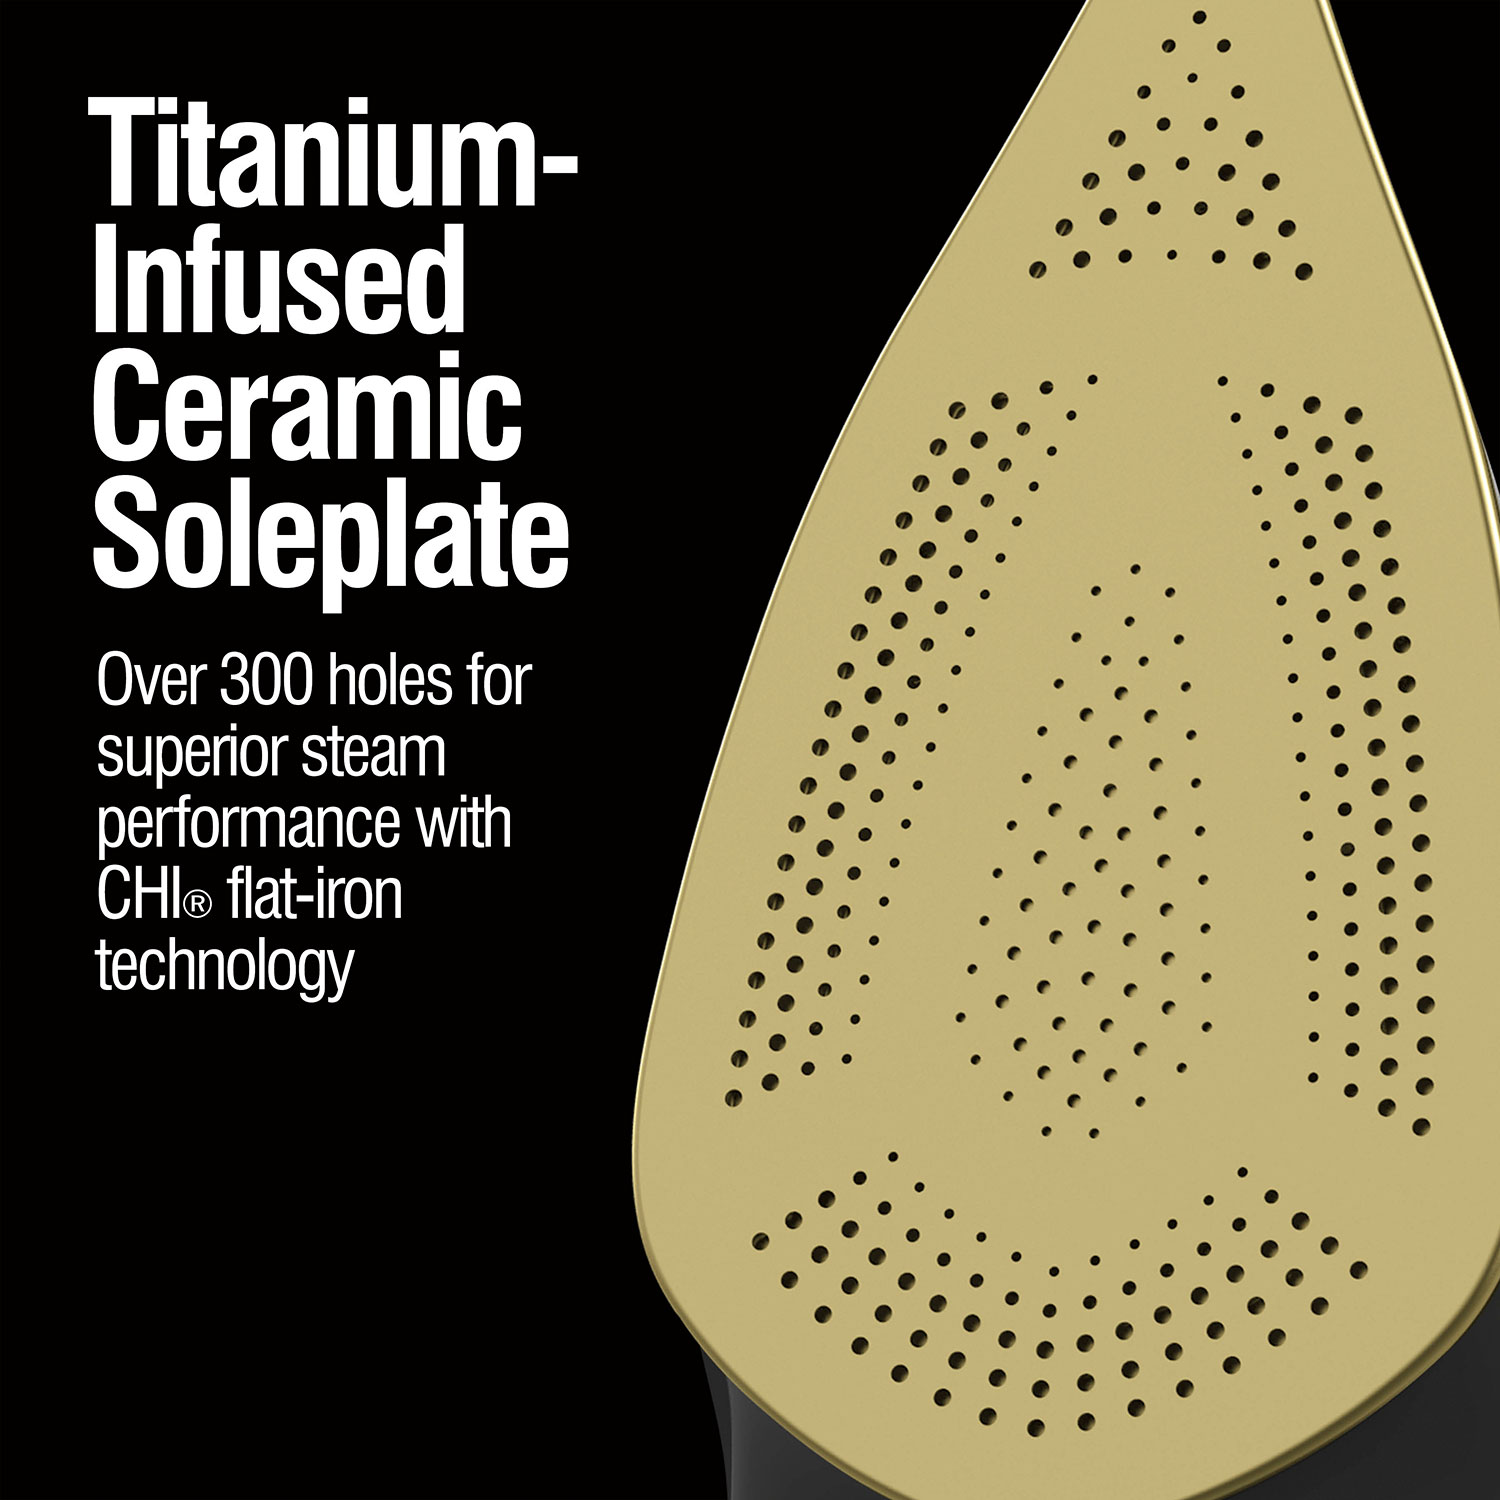 Titanium-infused ceramic soleplate with over 300 holes for superior steam performance with CHI flat-iron technology